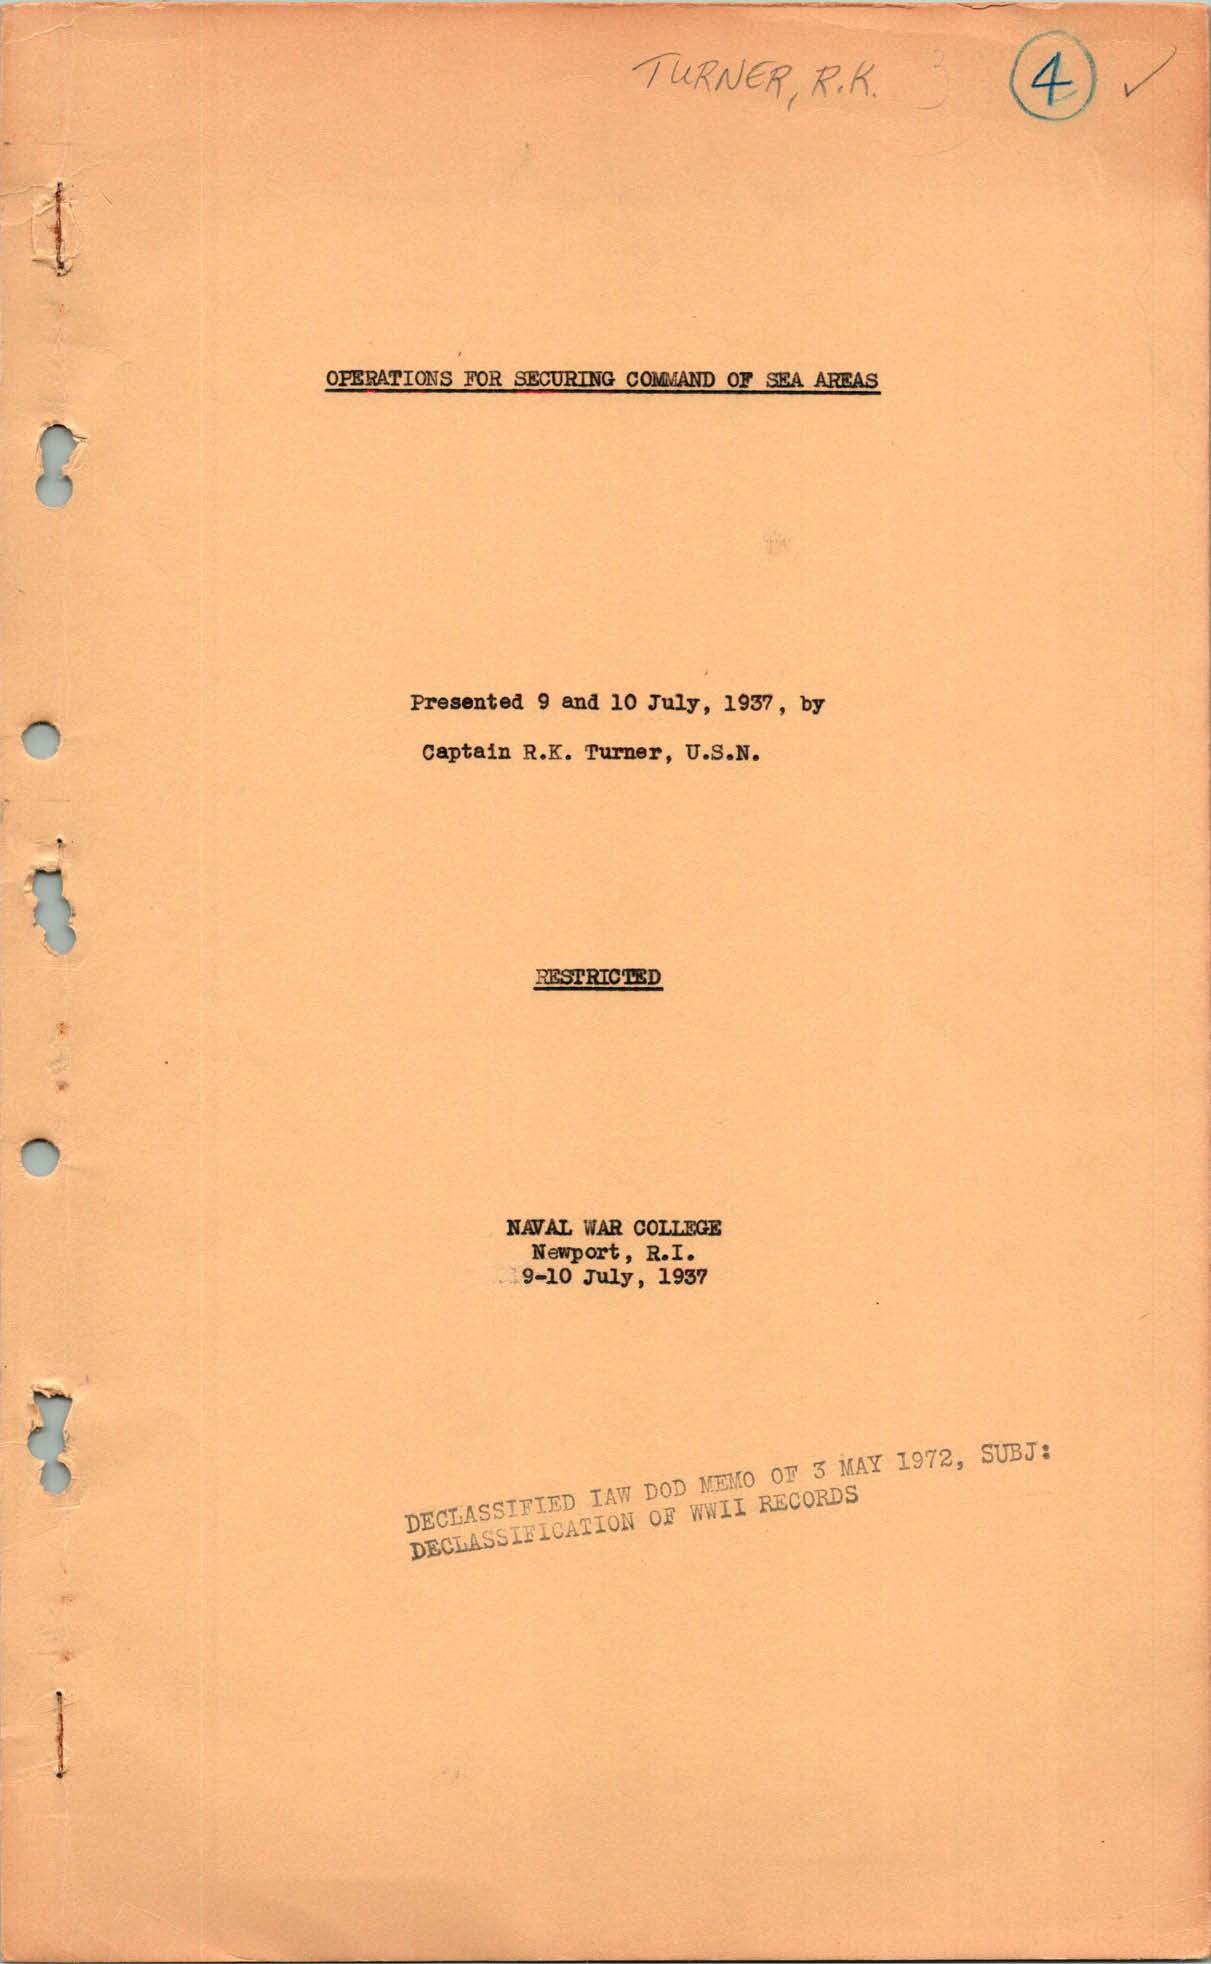 Operations for Security Command of Sea Areas, by Richmond K. Turner